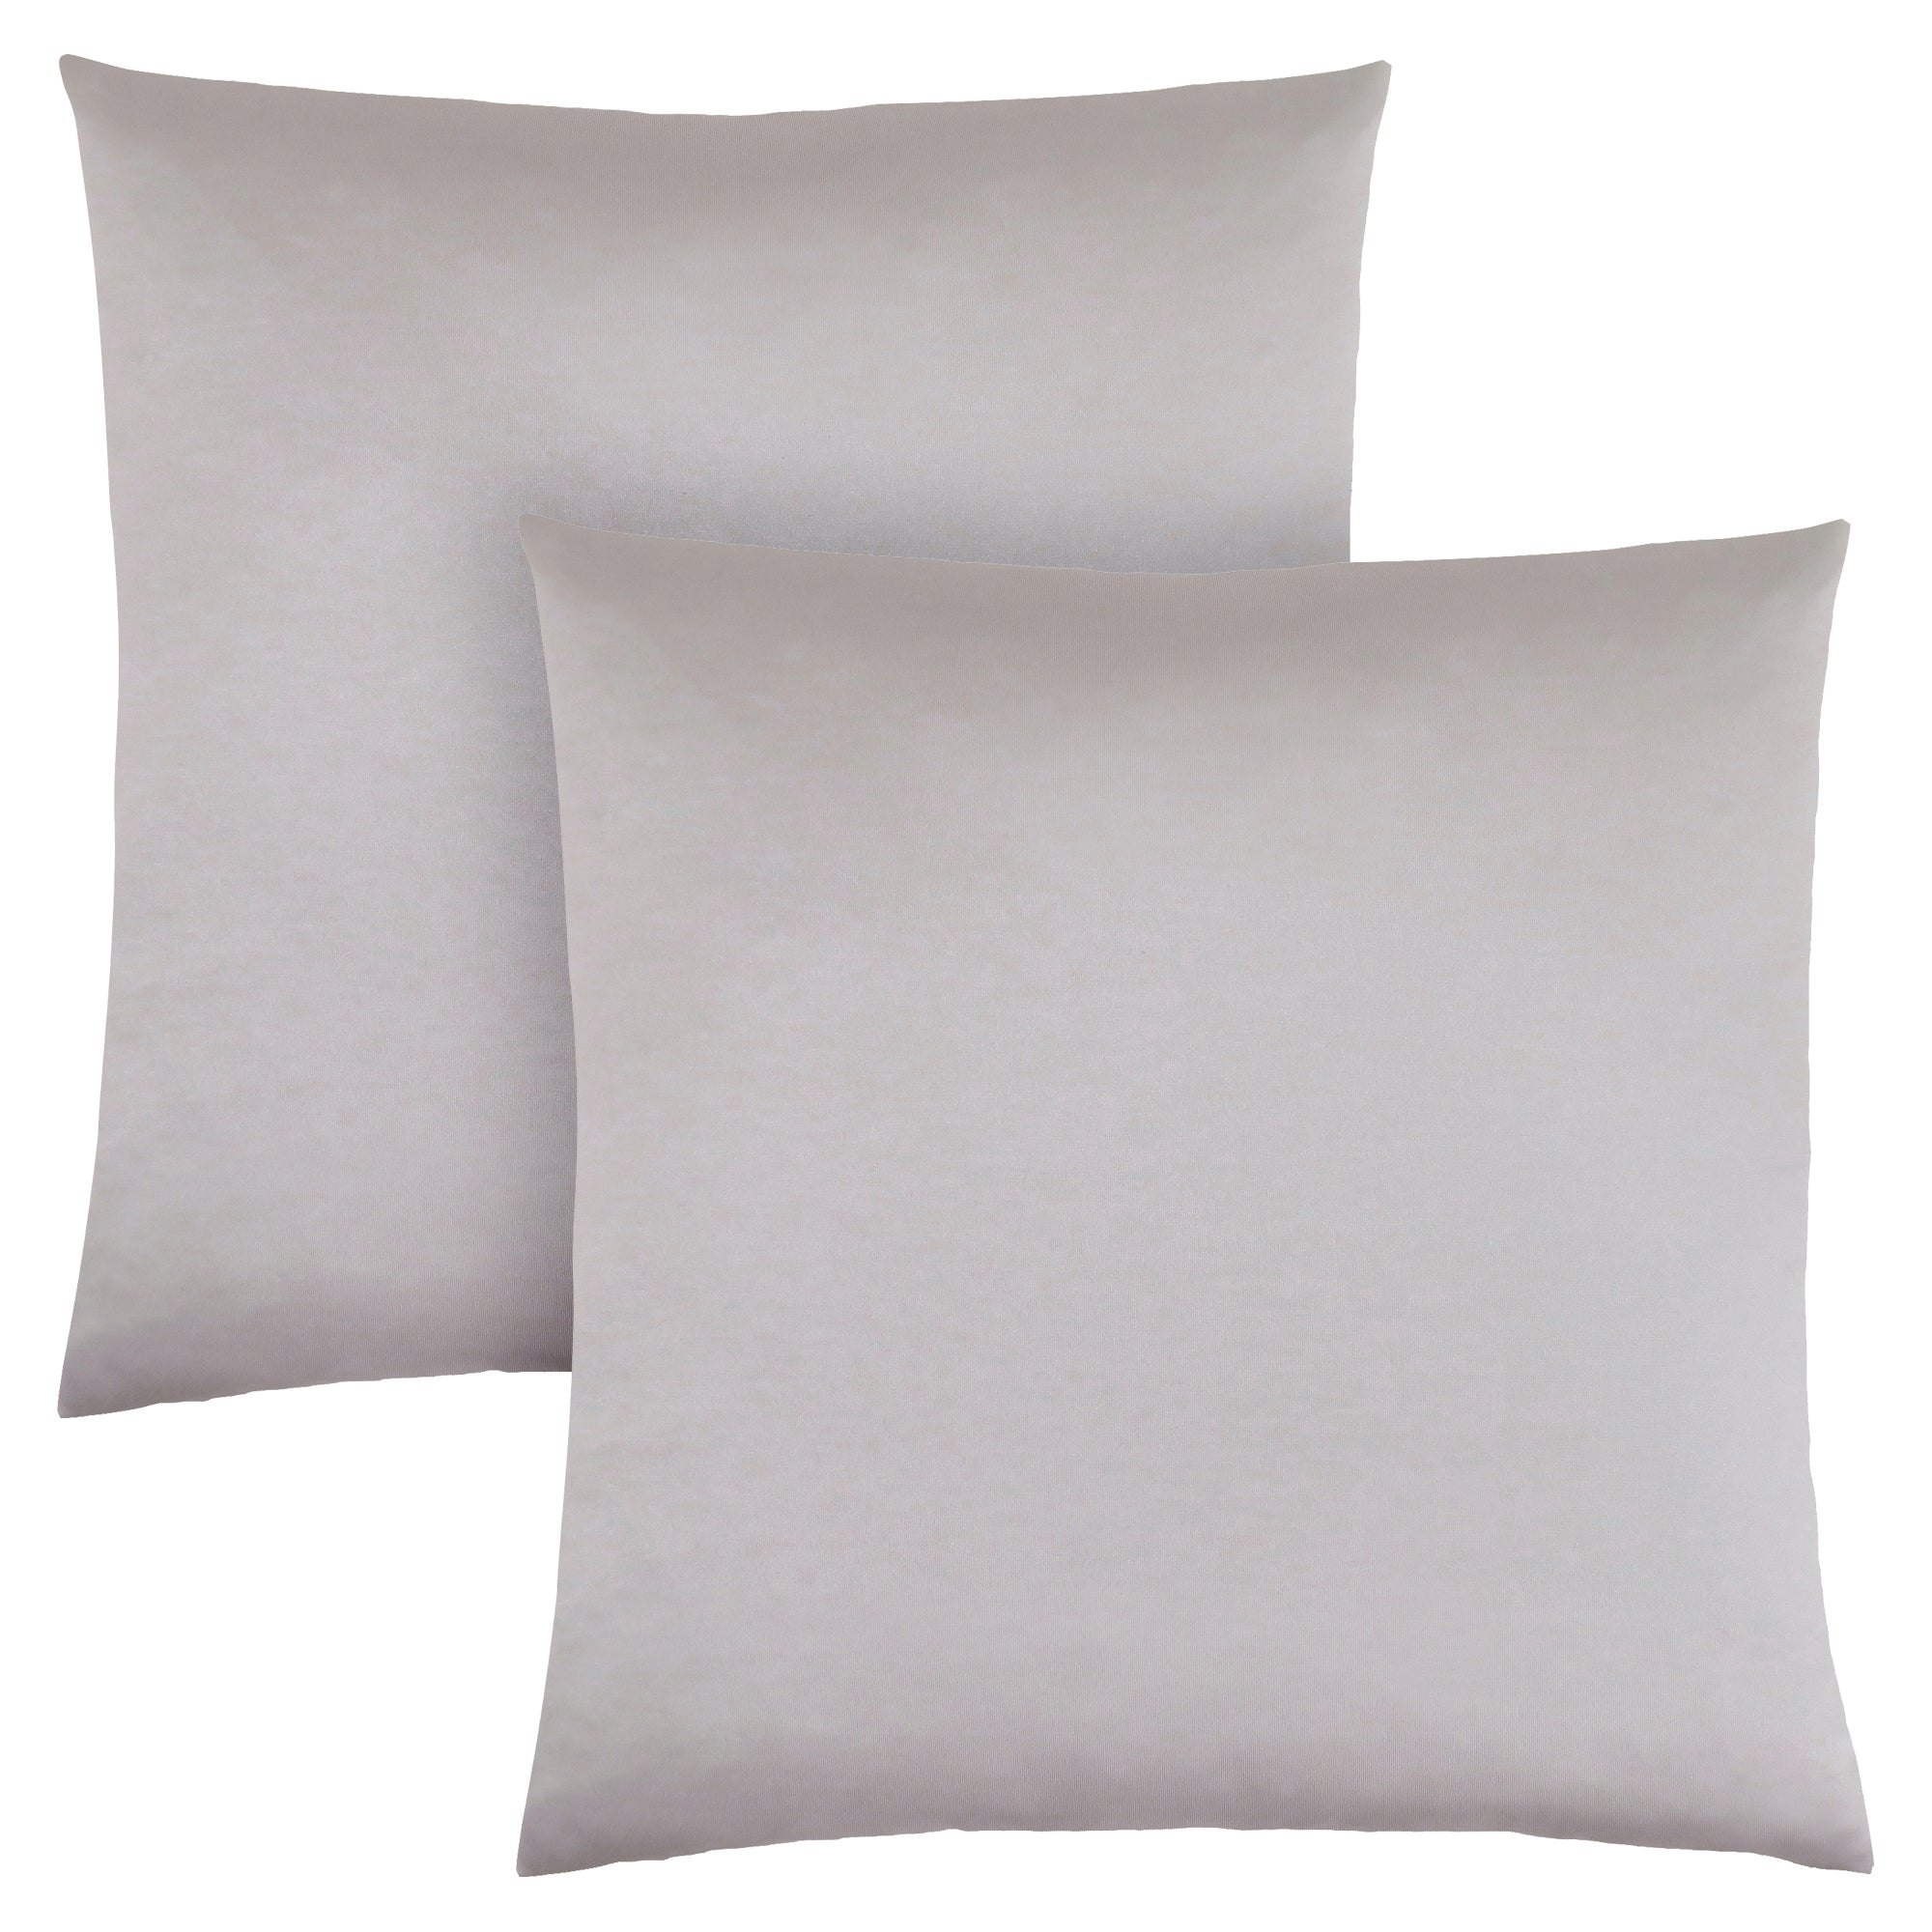 MN-969337    Pillows, Set Of 2, 18 X 18 Square, Insert Included, Decorative Throw, Accent, Sofa, Couch, Bed, Satin-Look Polyester Fabric, Hypoallergenic Soft Polyester Insert, Silver, Glam